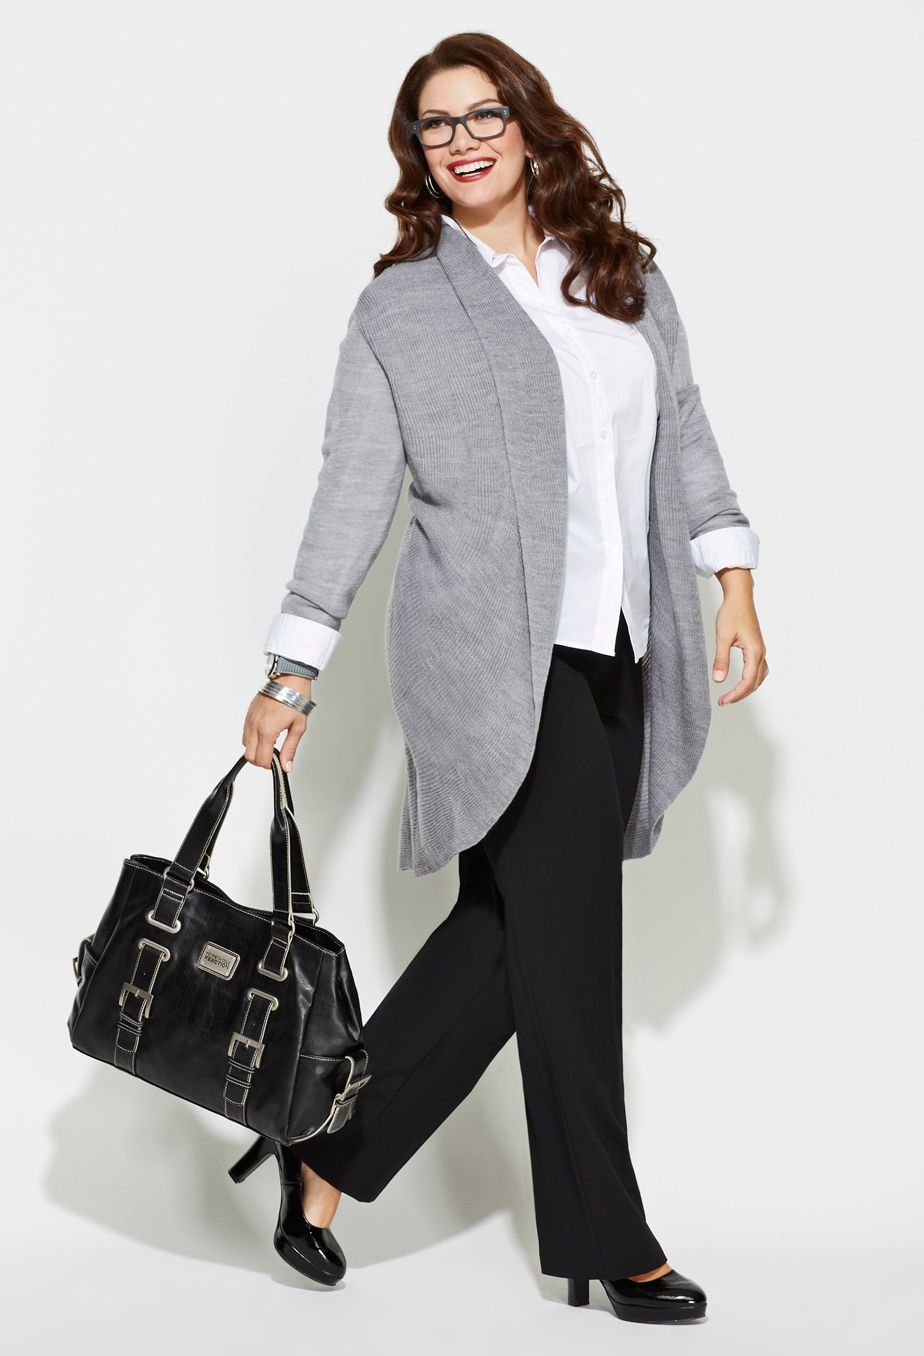 Classic-business-wear 115+ Elegant Work Outfit Ideas for Plus Size Ladies